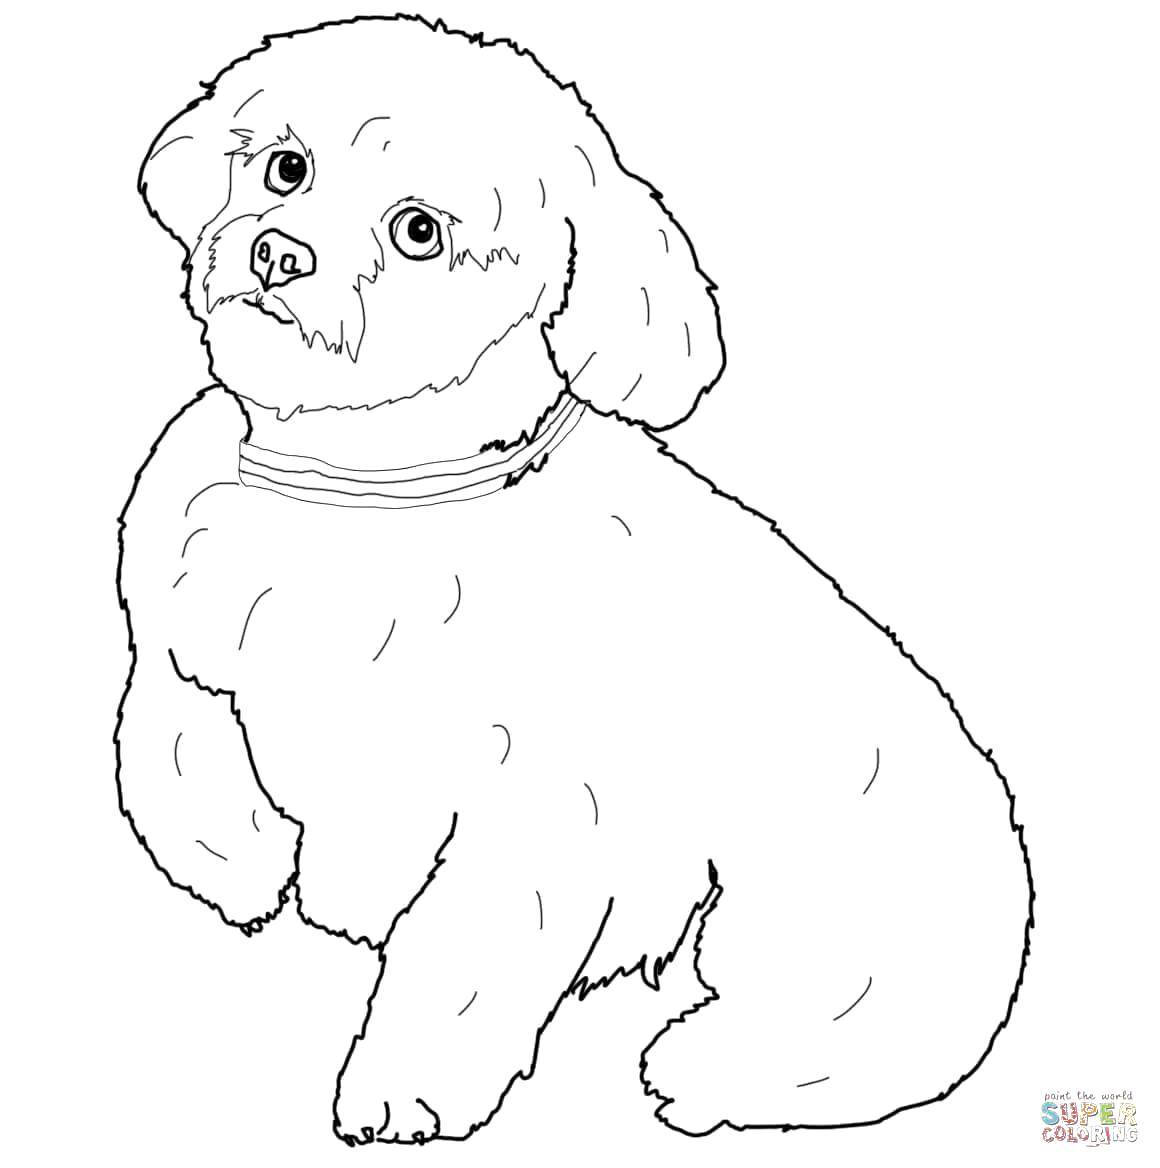 Coloring Little dog. Category Animals. Tags:  Animals, dog.